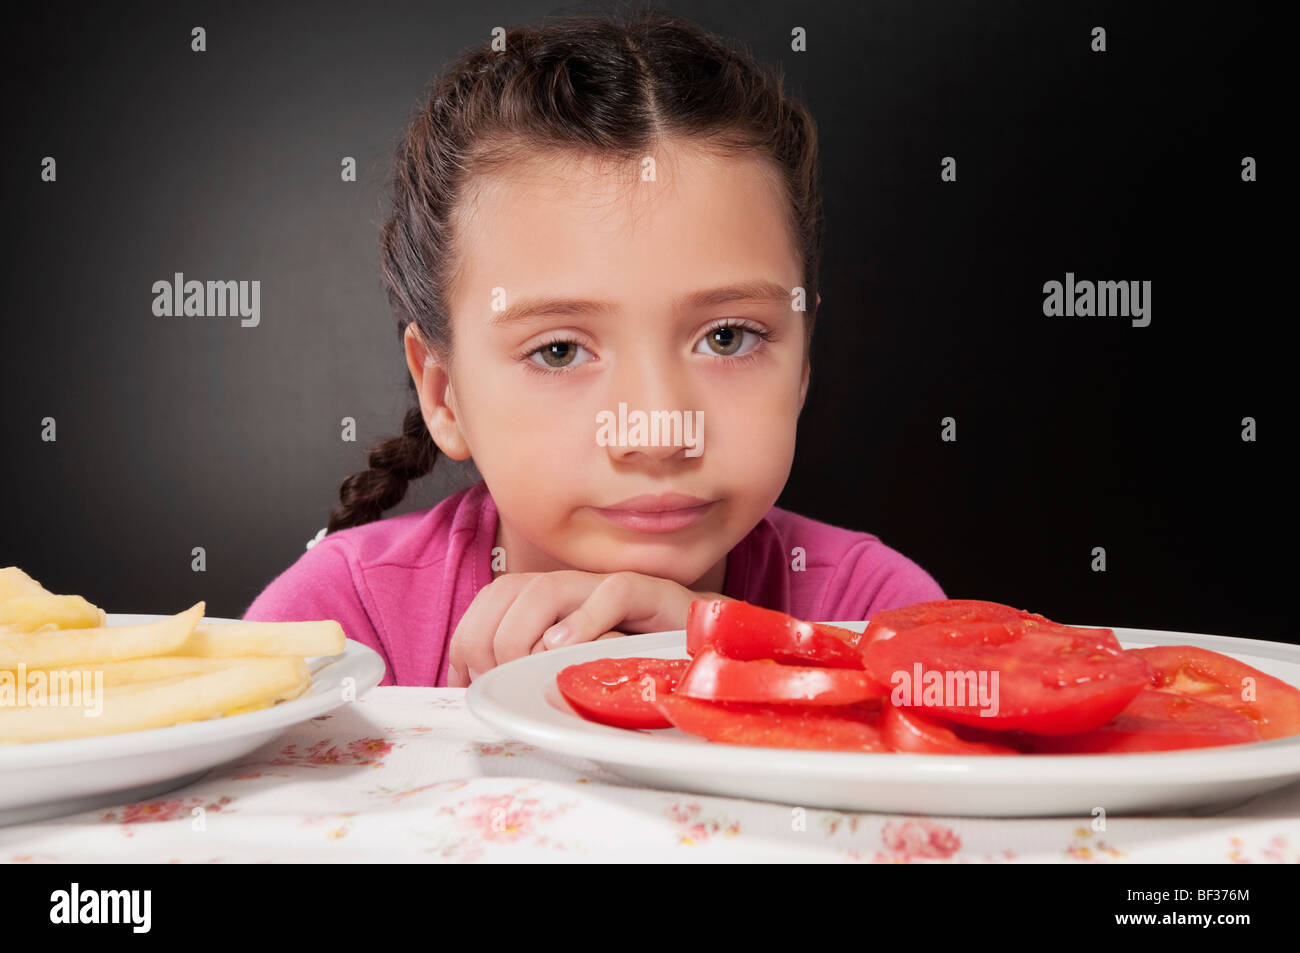 Close-up of a girl frowning with a plate of tomato slices Stock Photo